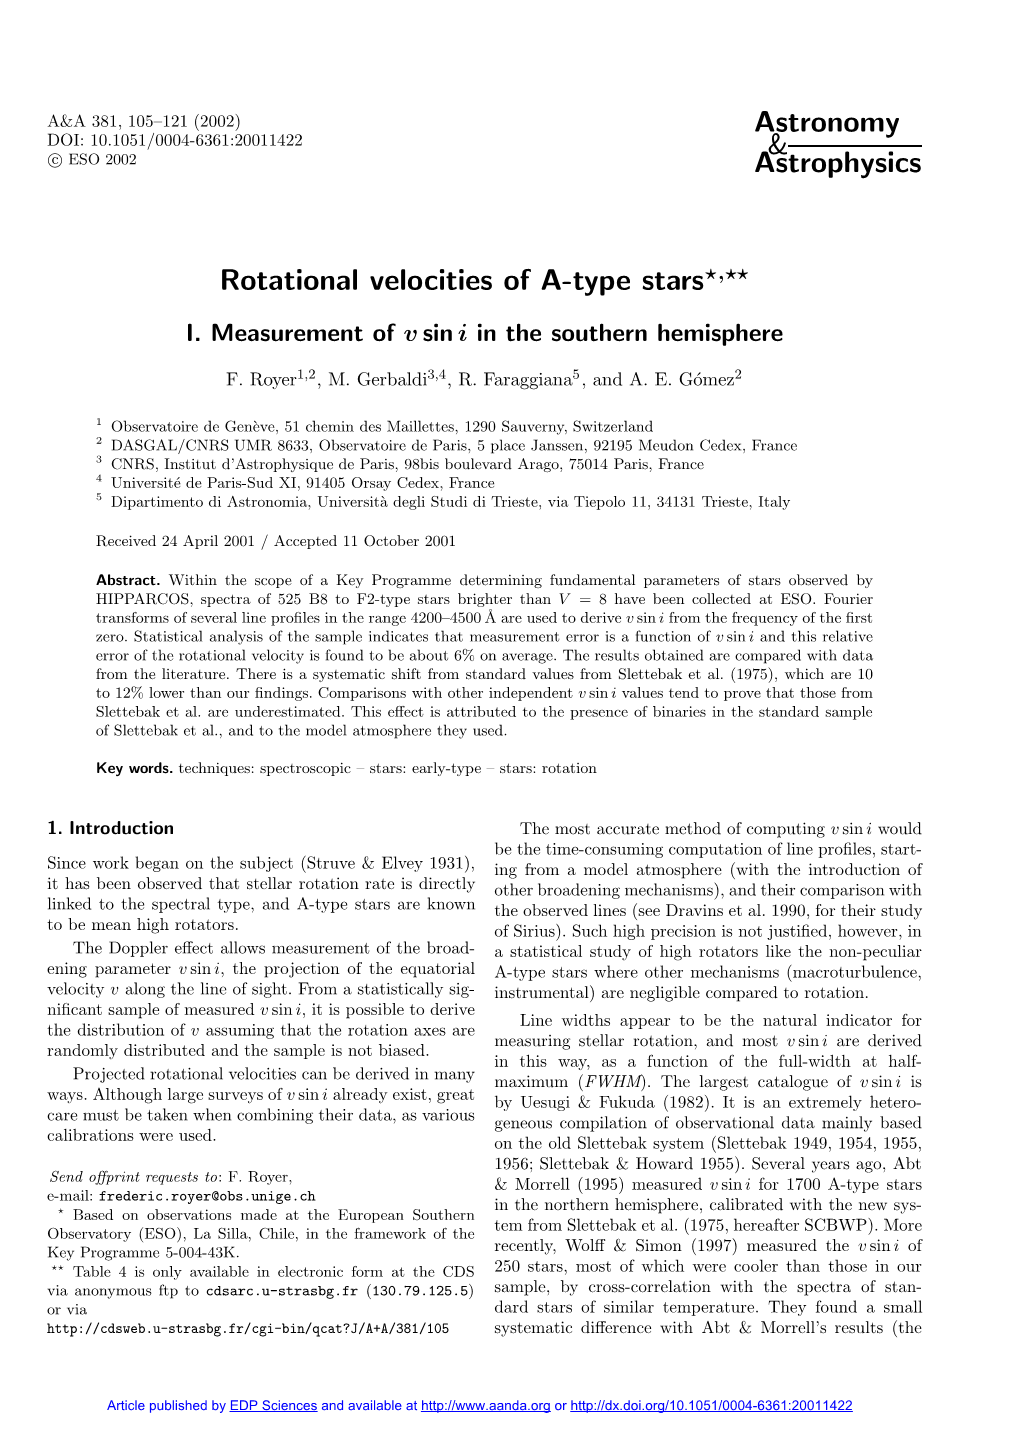 Rotational Velocities of A-Type Stars?,??